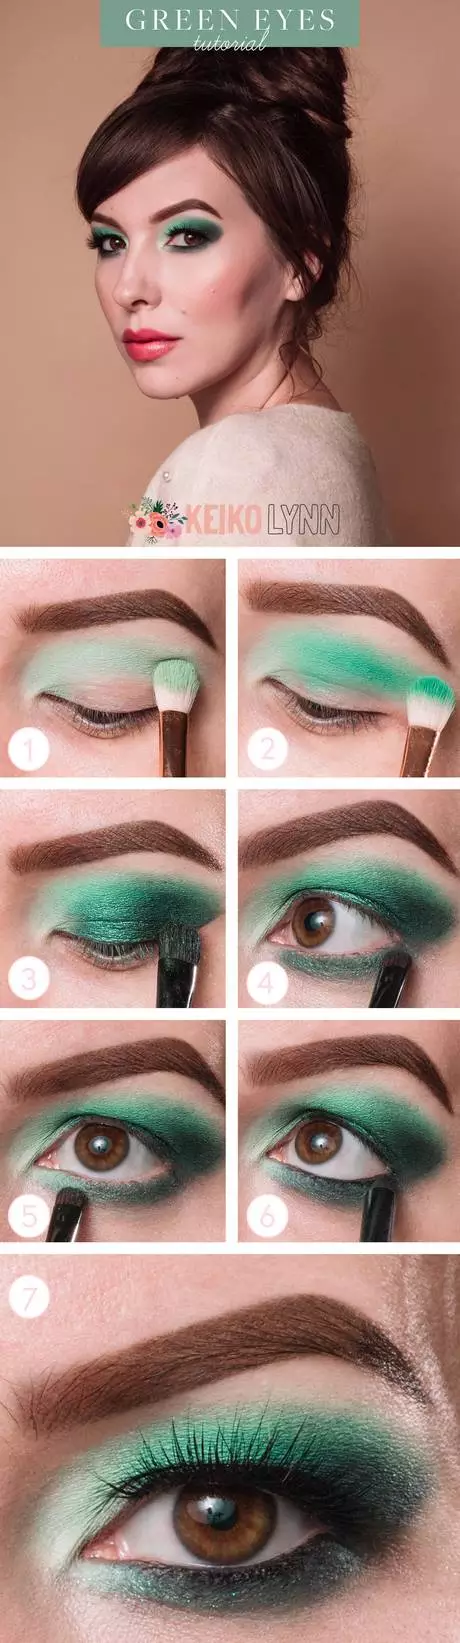 night-out-makeup-tutorial-for-green-eyes-74_14-7 Night out make-up tutorial voor groene ogen